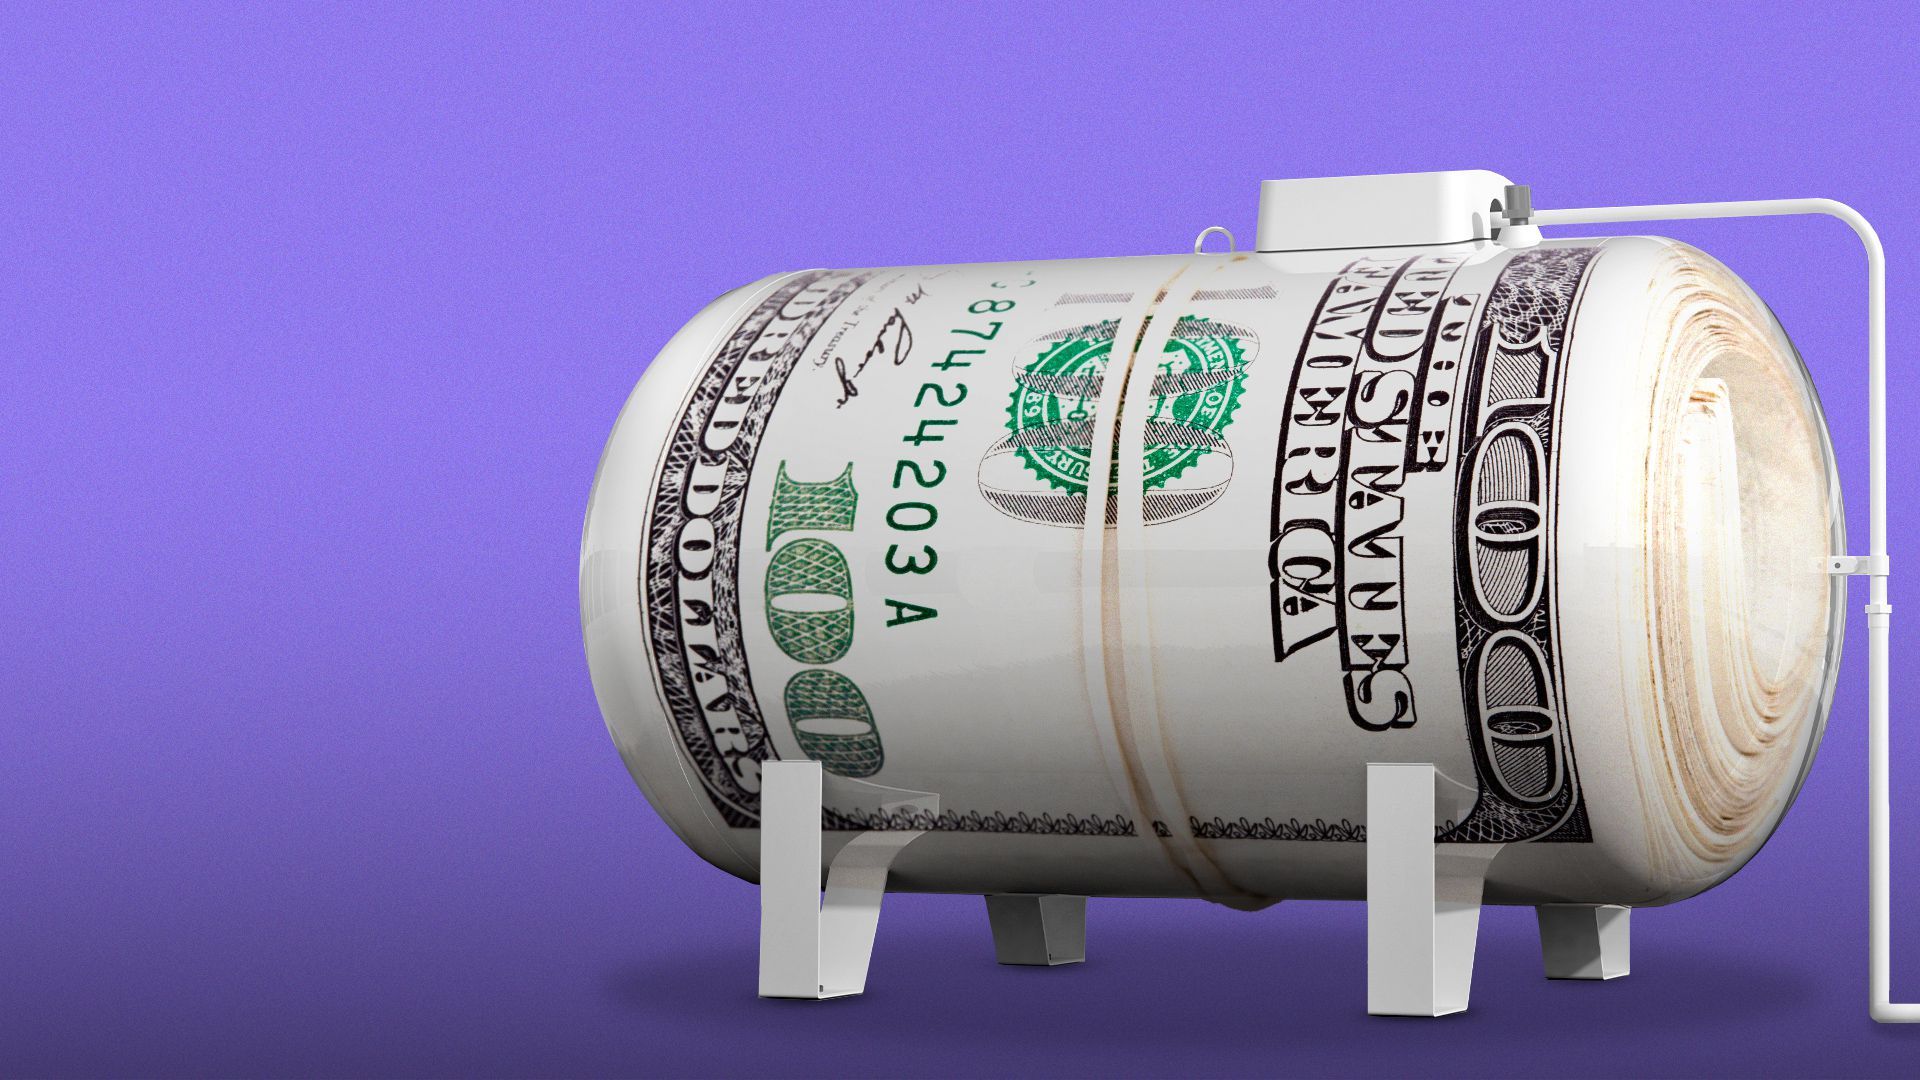 Illustration of a large gas container made out of a roll of $100 bills.